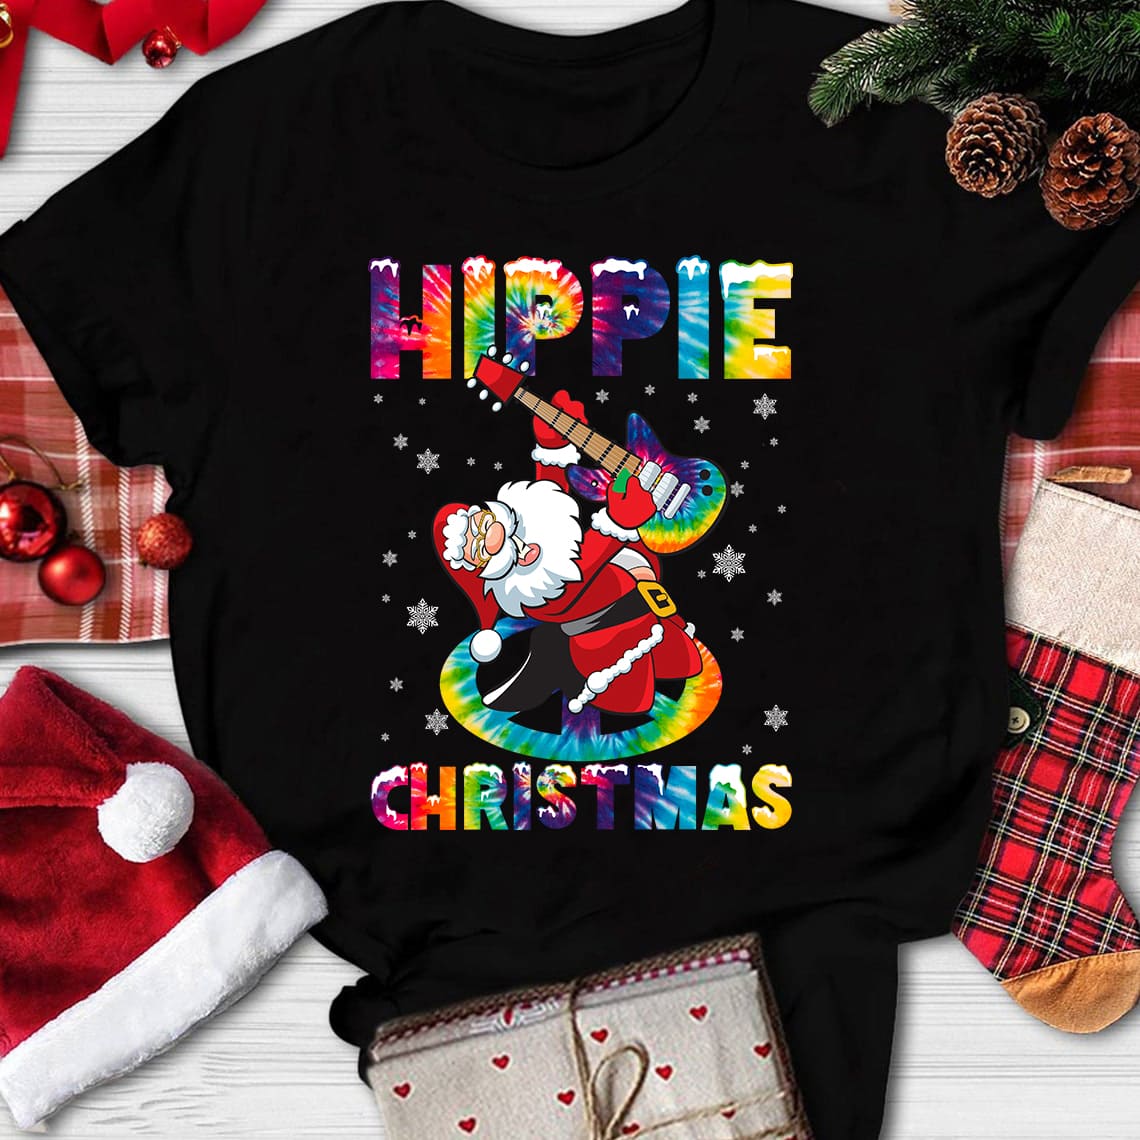 Hippie Christmas - Santa Claus playing guitar, Christmas ugly sweater